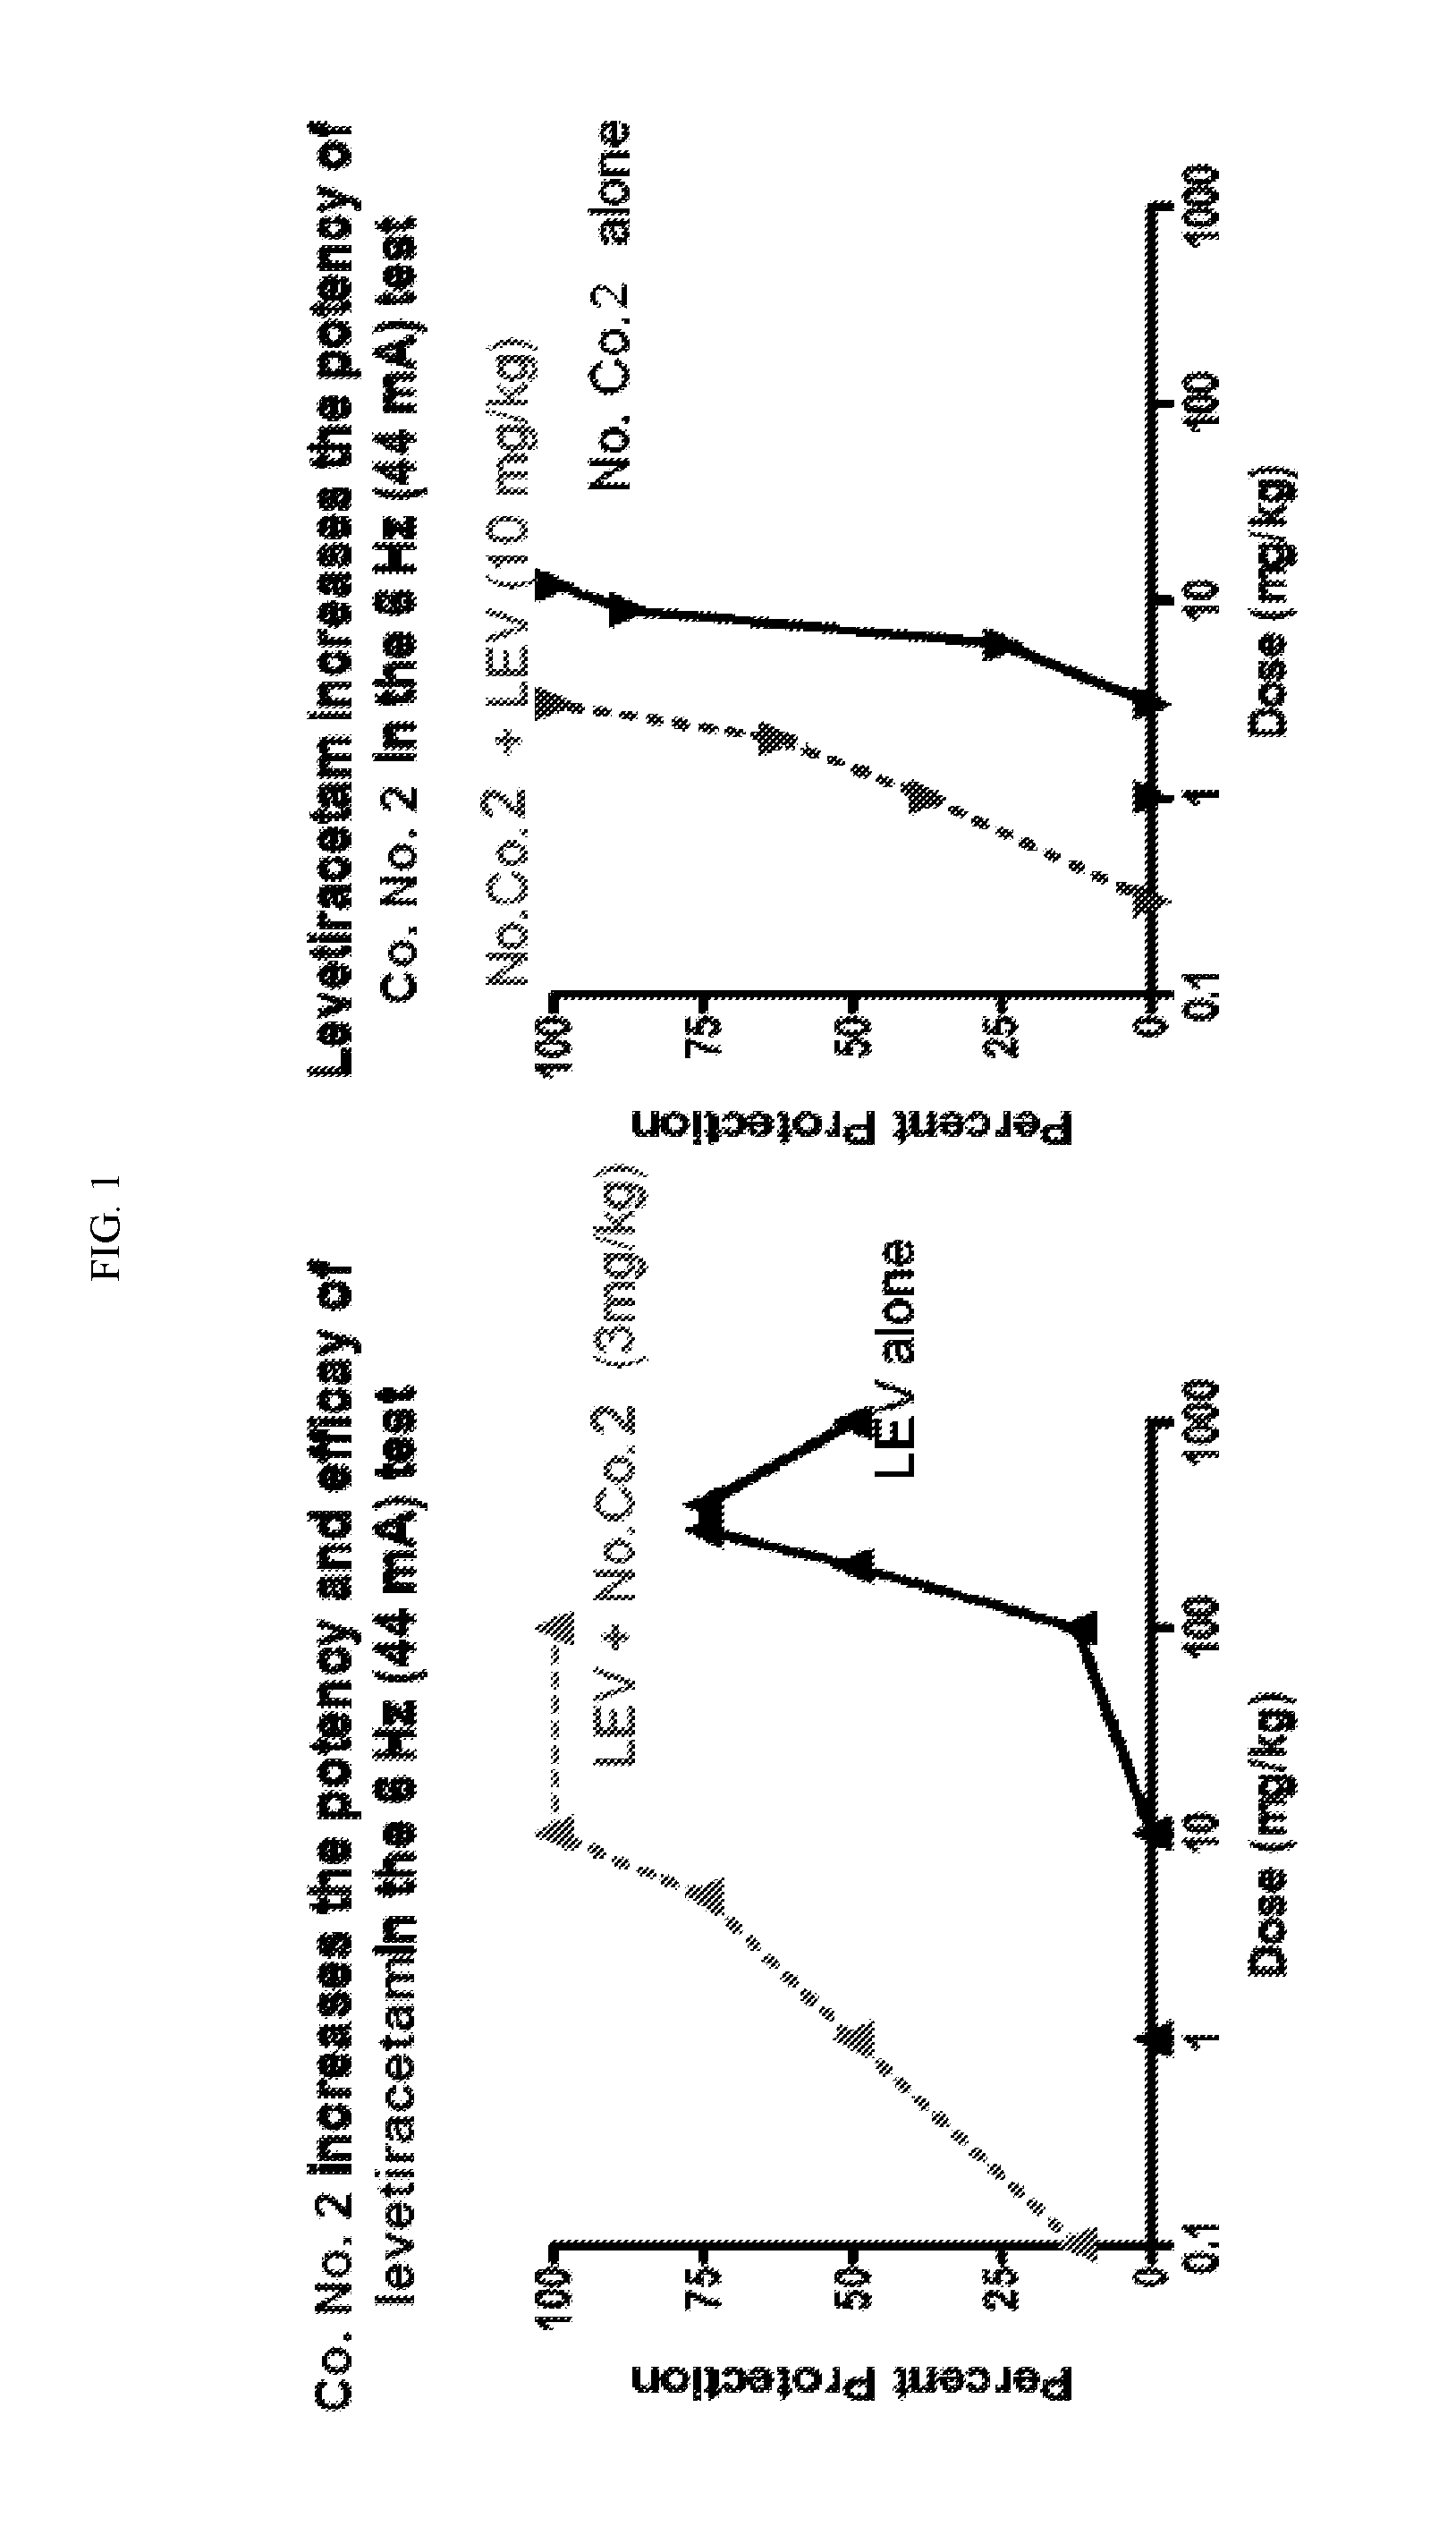 Combinations comprising positive allosteric modulators or orthosteric agonists of metabotropic glutamatergic receptor subtype 2 and their use